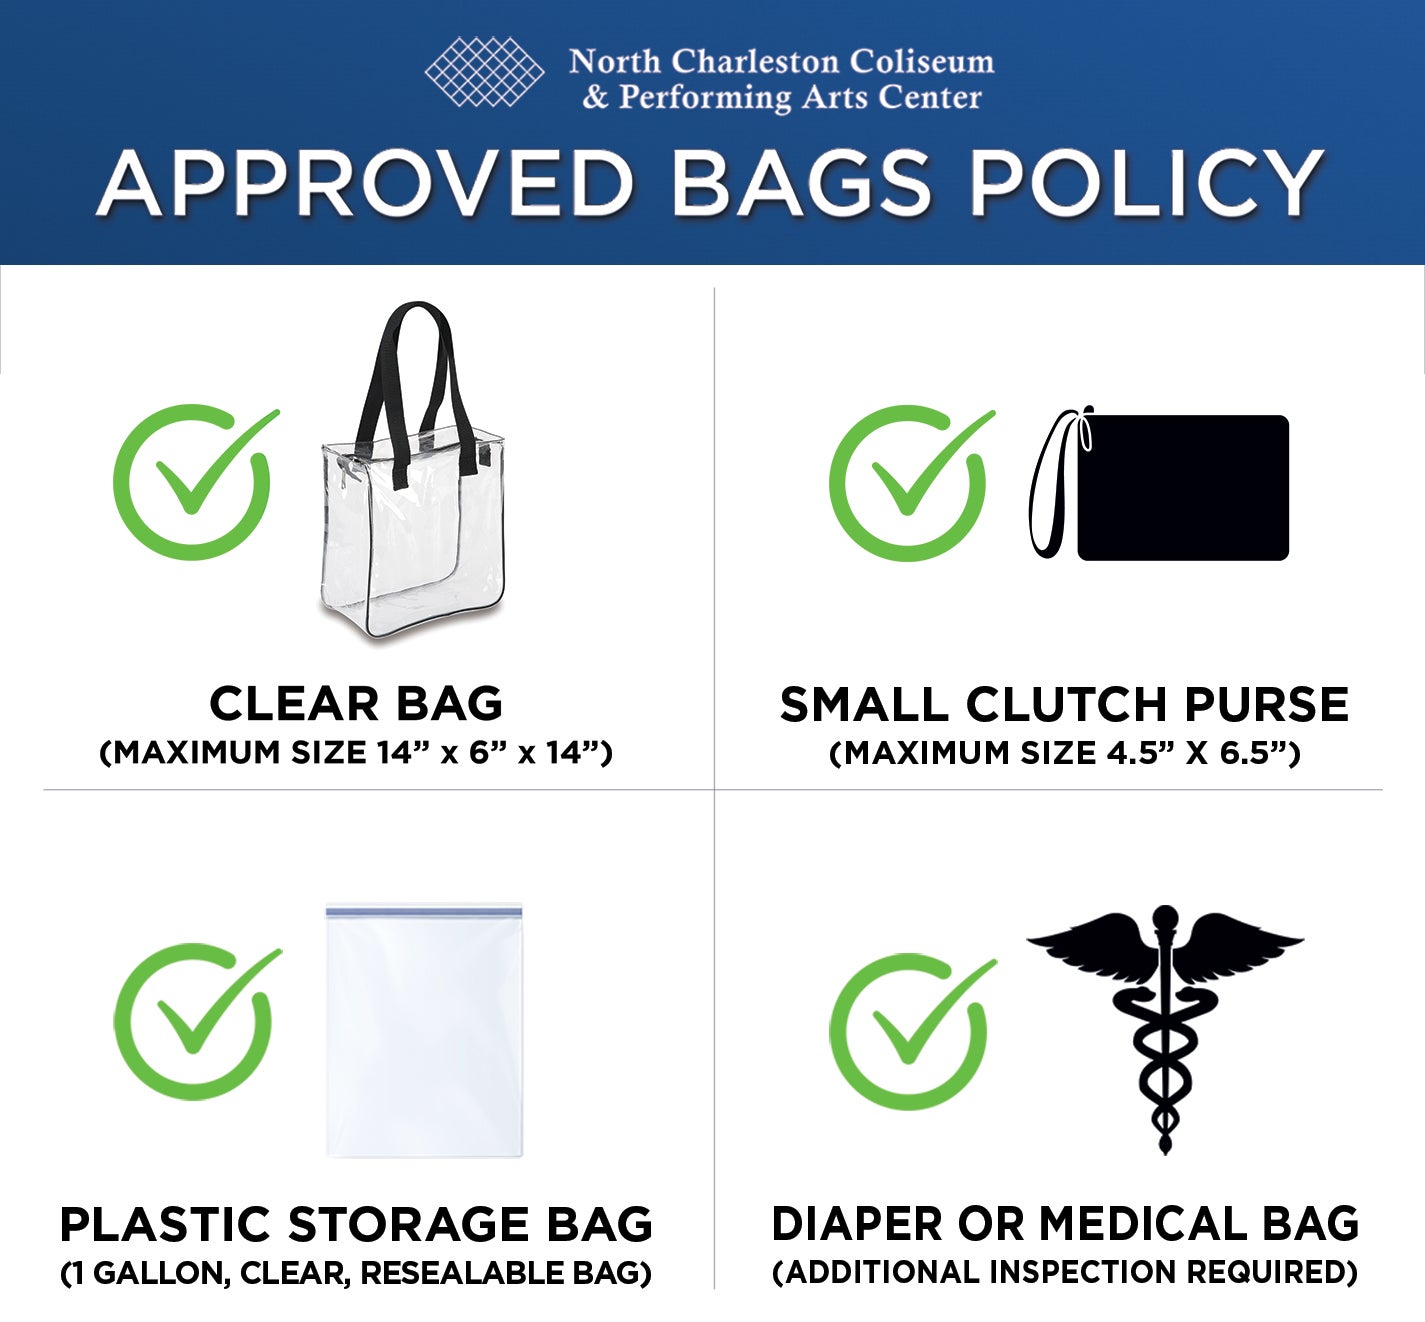 Clear-Bag-Policy-Visuals-Update-Web-Version.jpg